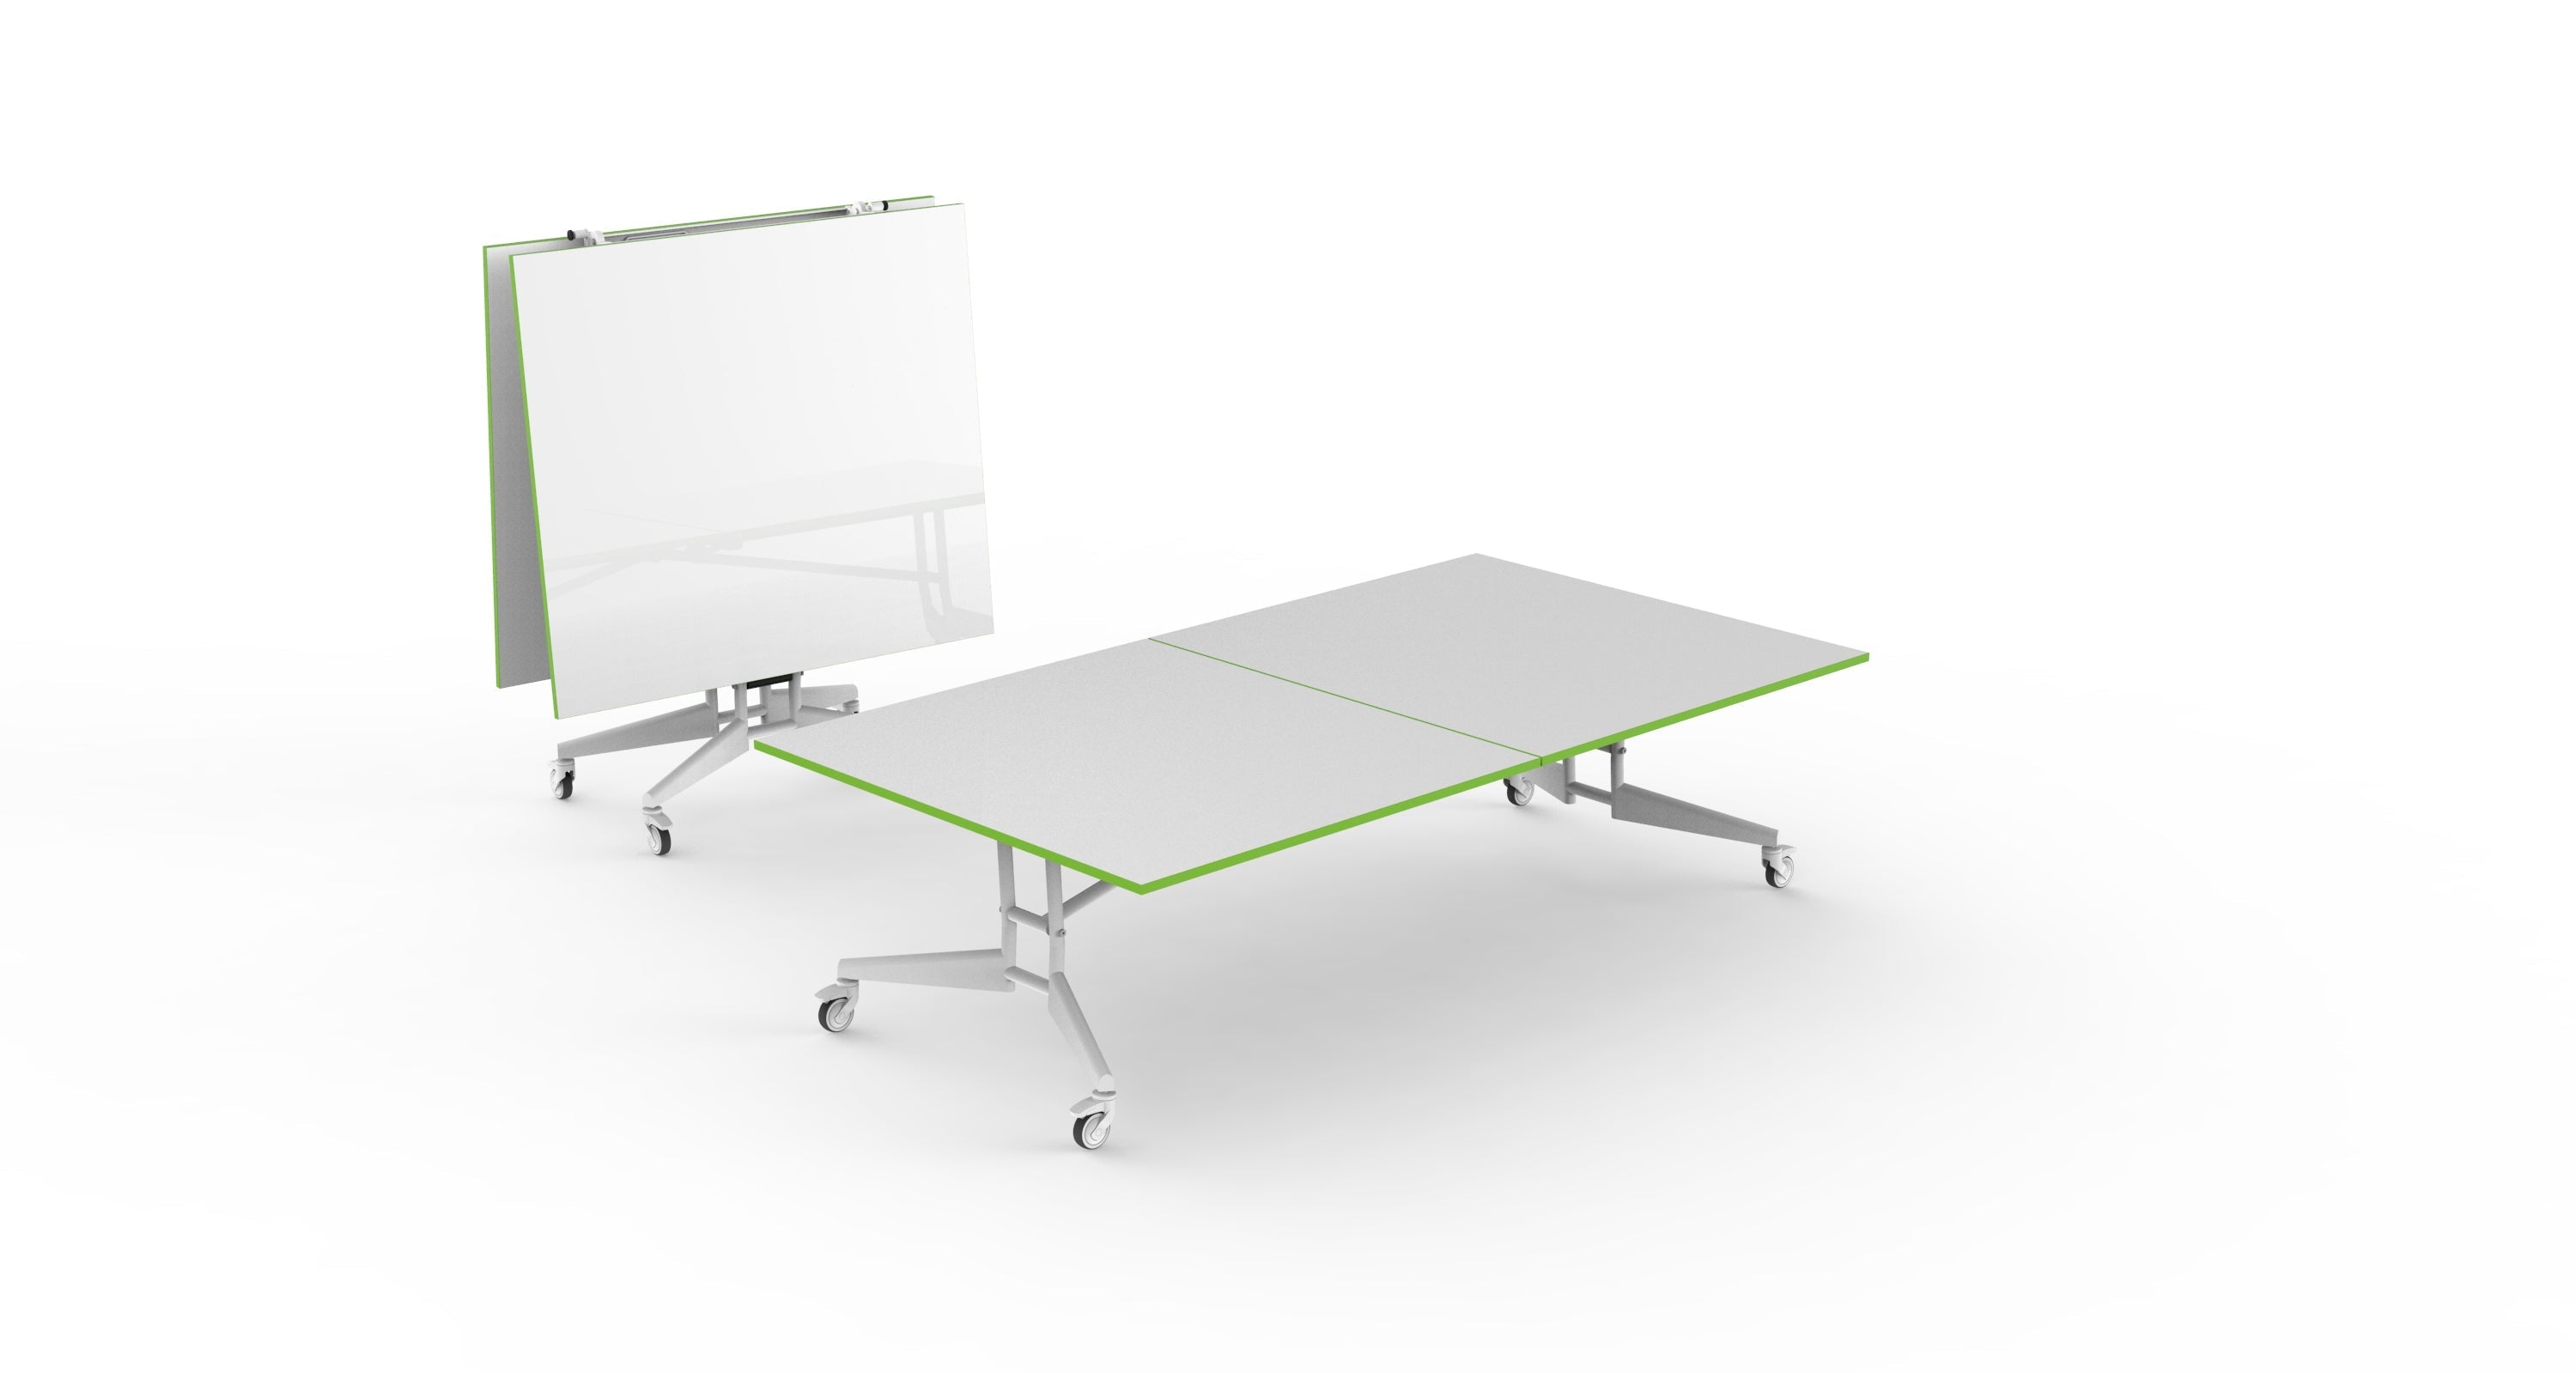 NOMAD Sport Ping Pong Conference Table